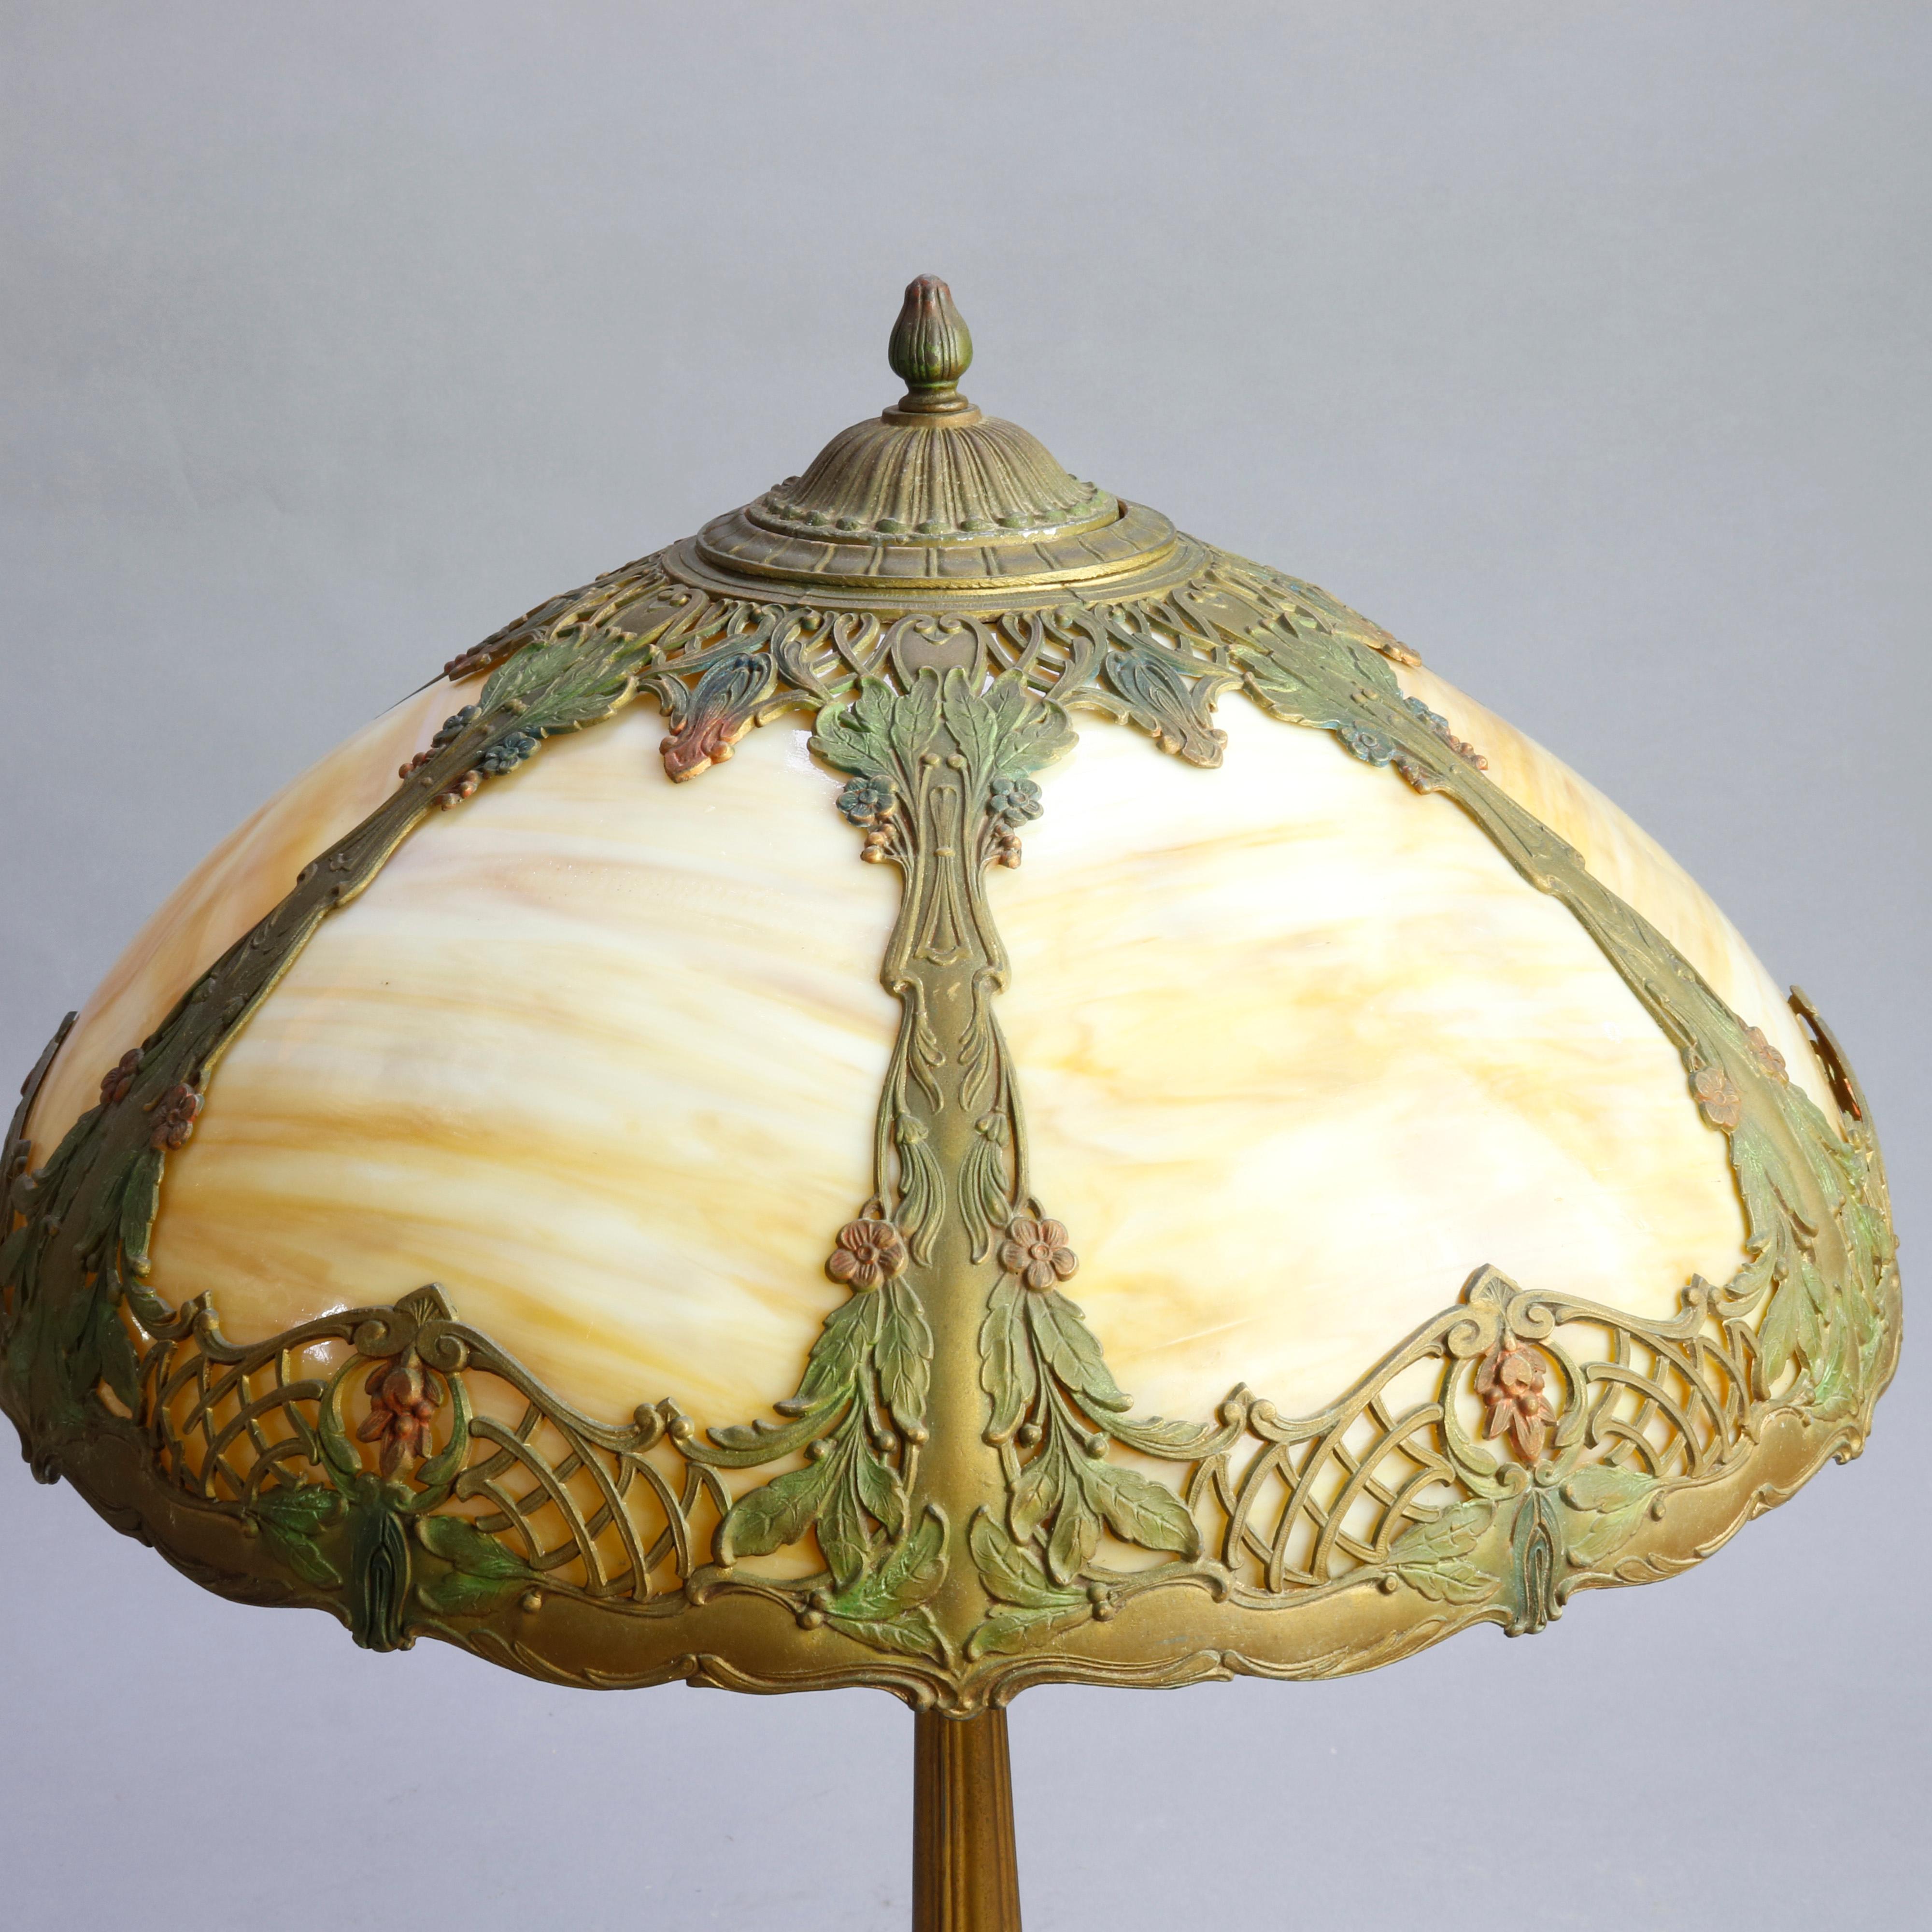 An antique table lamp in the manner of Bradley and Hubbard offers polychromed filigree cast shade having foliate elements and housing bent slag glass panels, surmounting double socket base, professionally rewired and new sockets, circa